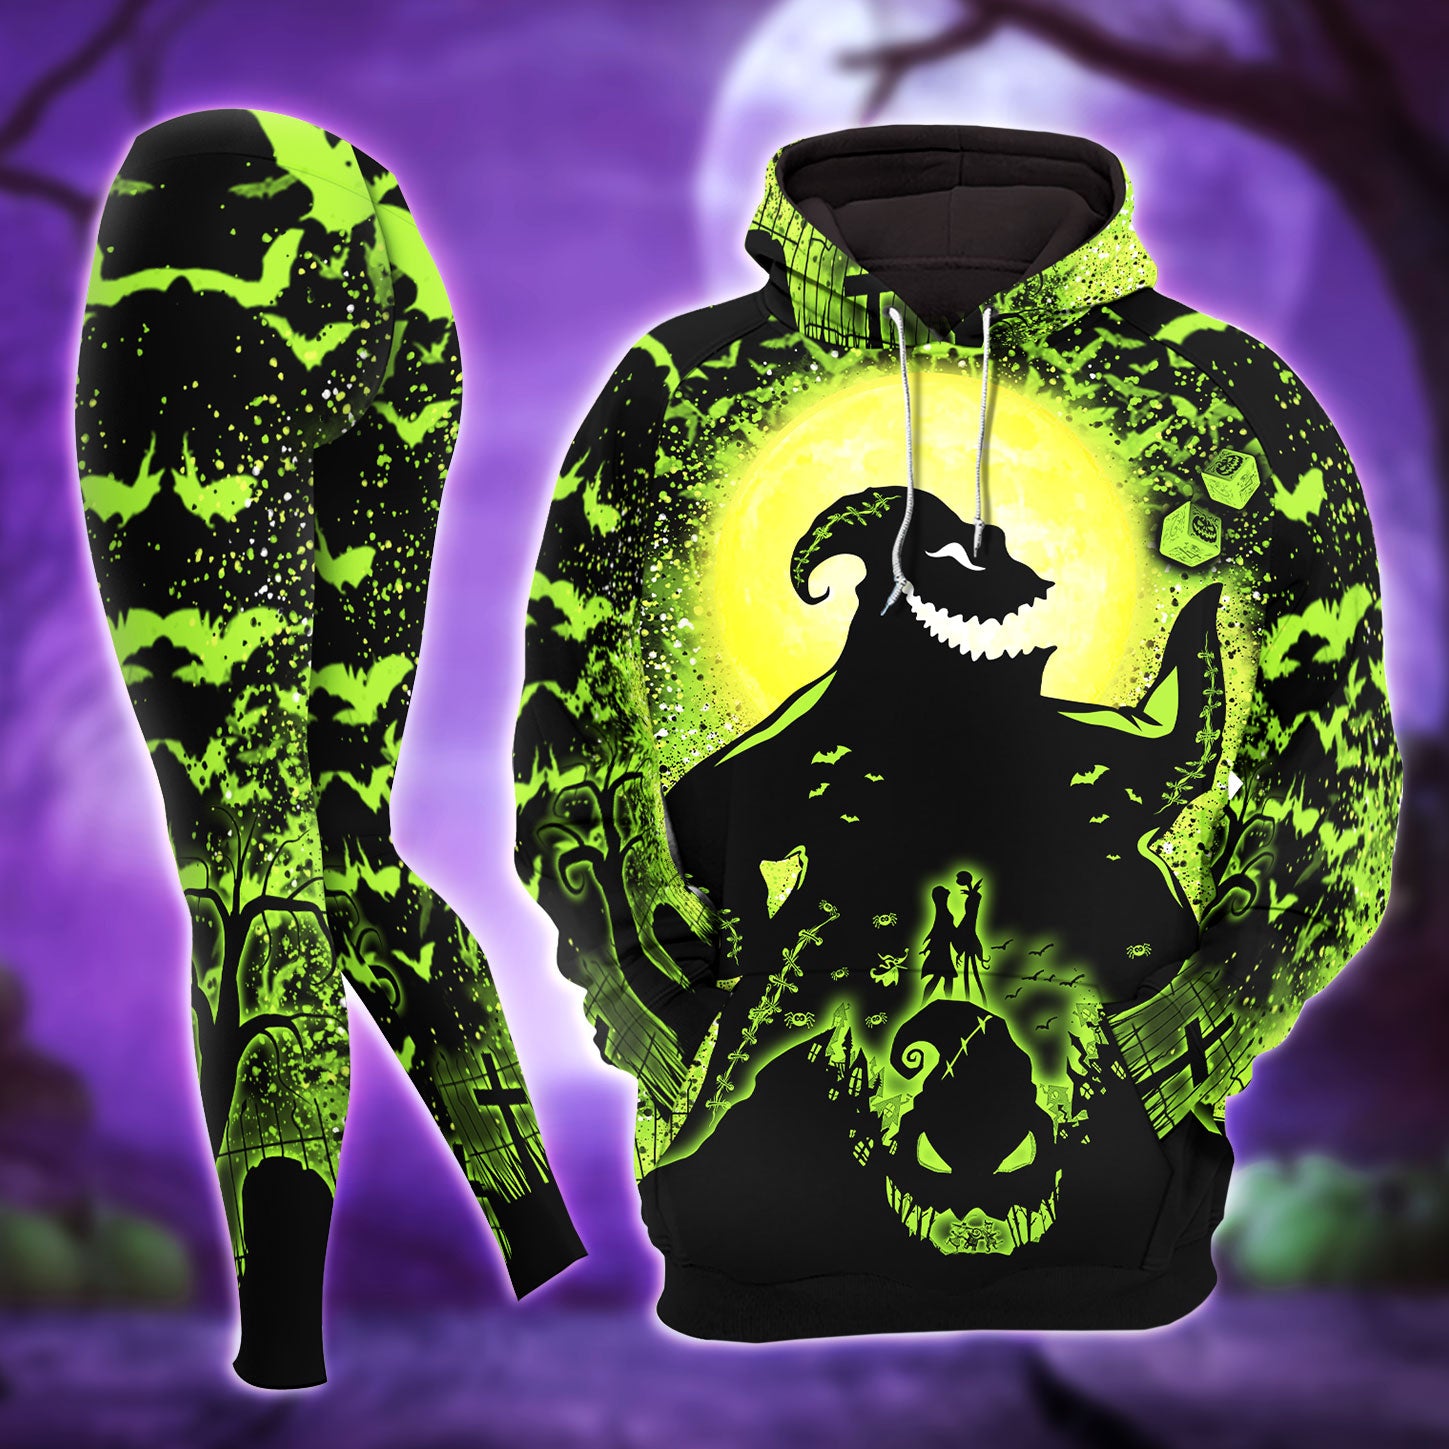 Black Green Nightmare Theme Combo Hoodie and Leggings - Dark and edgy matching set with skull designs for a unique and stylish look.